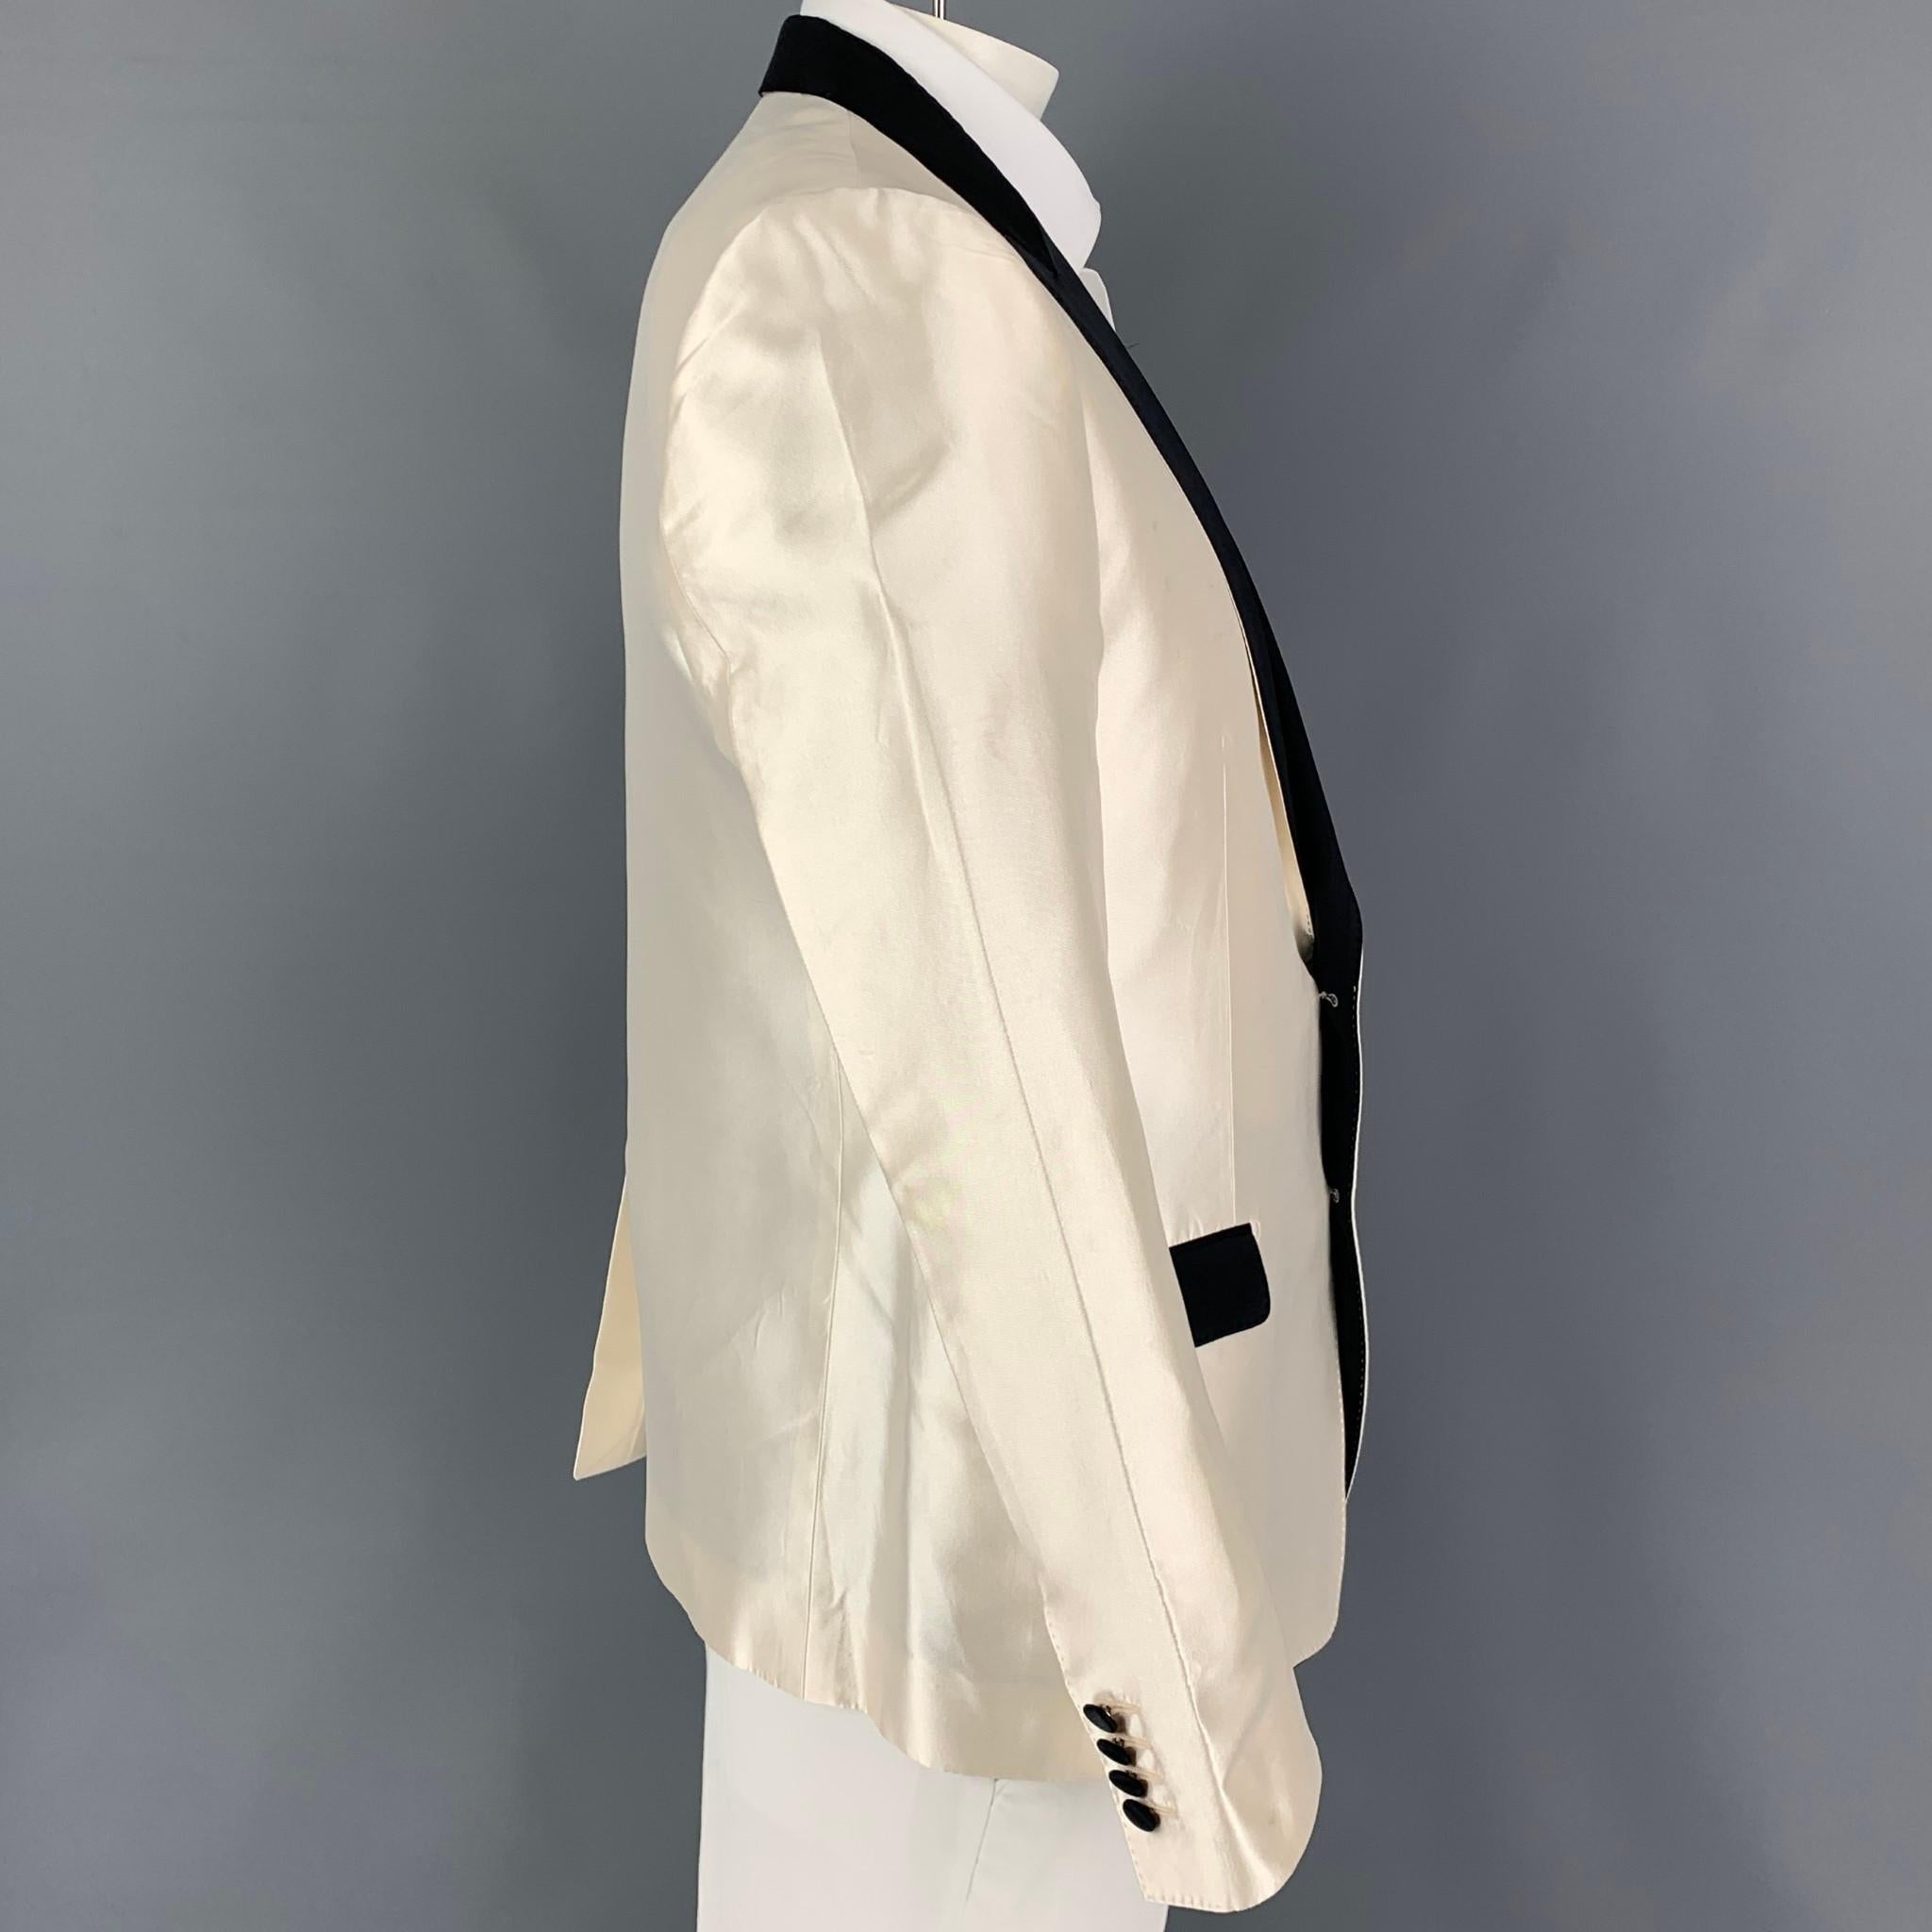 DOLCE & GABBANA sport coat comes in a beige & black silk blend with a full liner featuring a peak lapel, flap pockets, single back vent, and a double button closure. Made in Italy. 

Good Pre-Owned Condition. Moderate discoloration throughout.